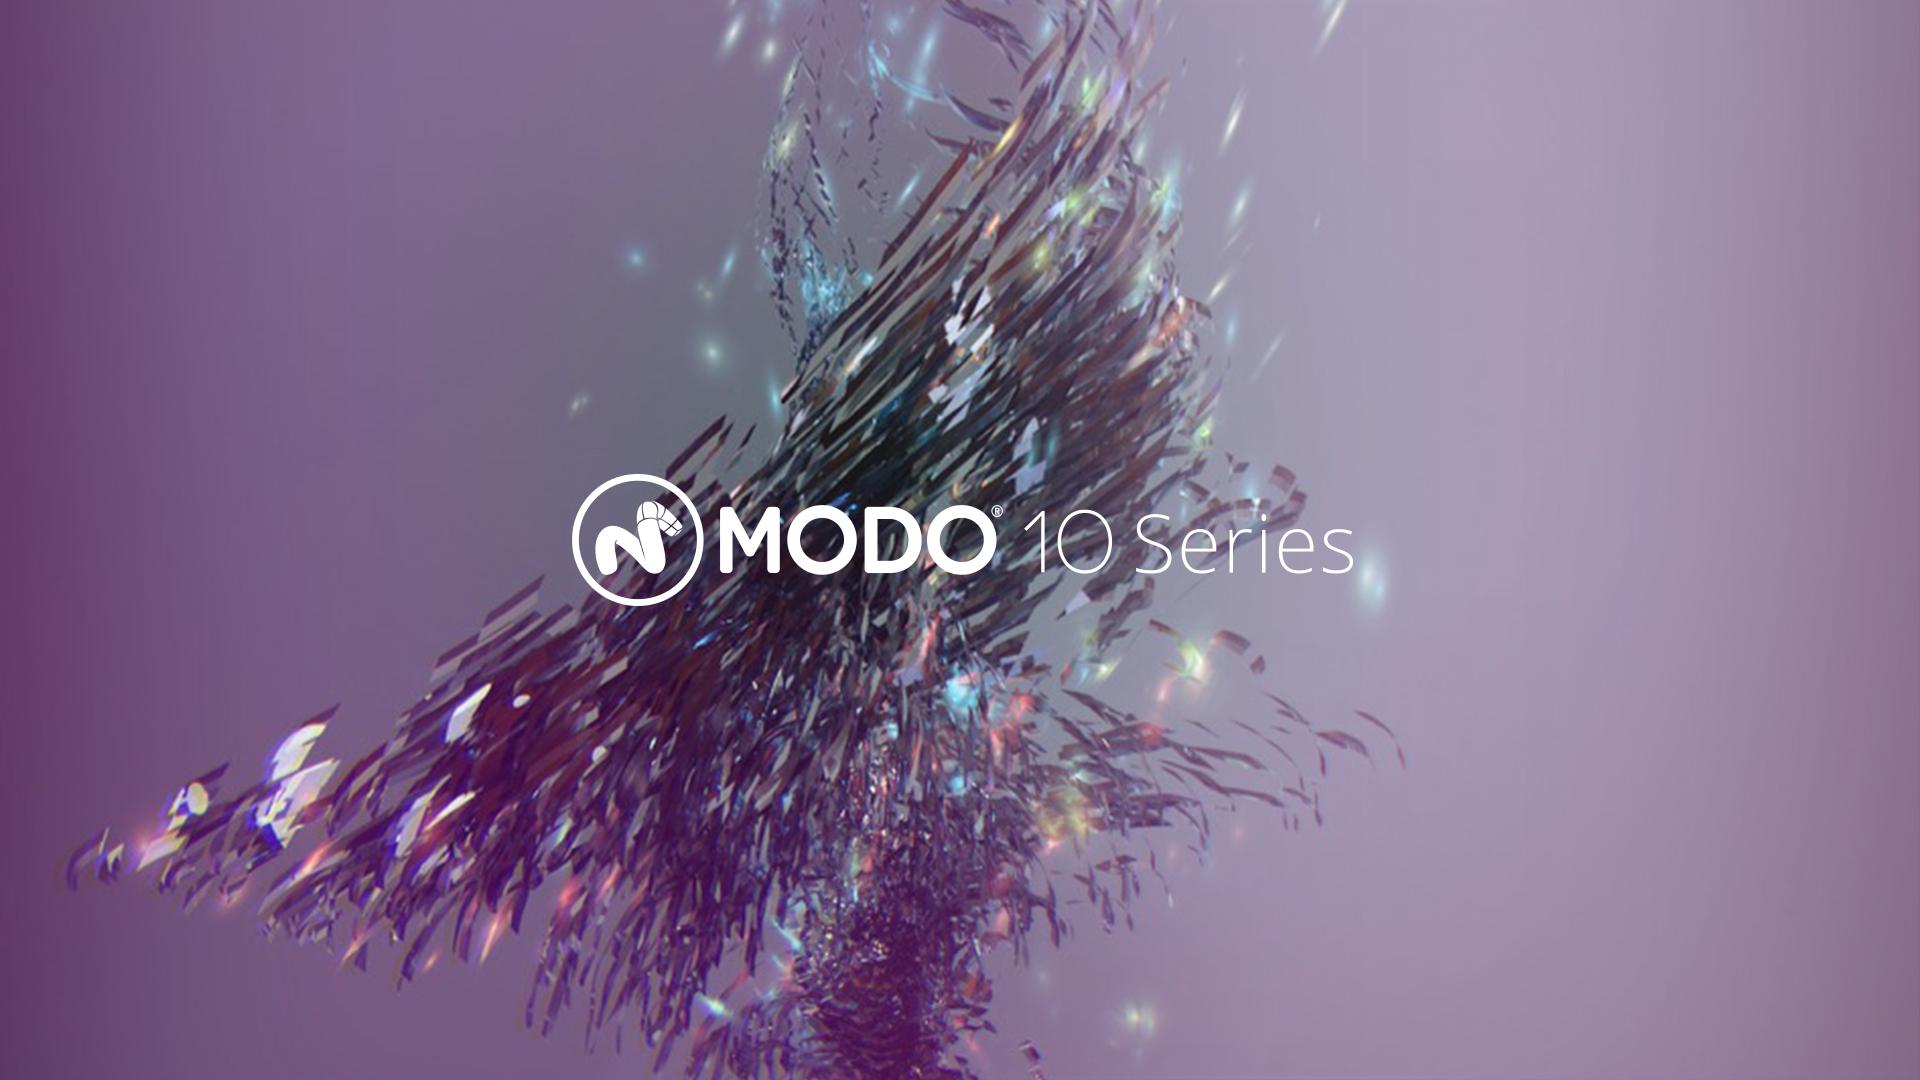 Foundry launches latest version of Modo